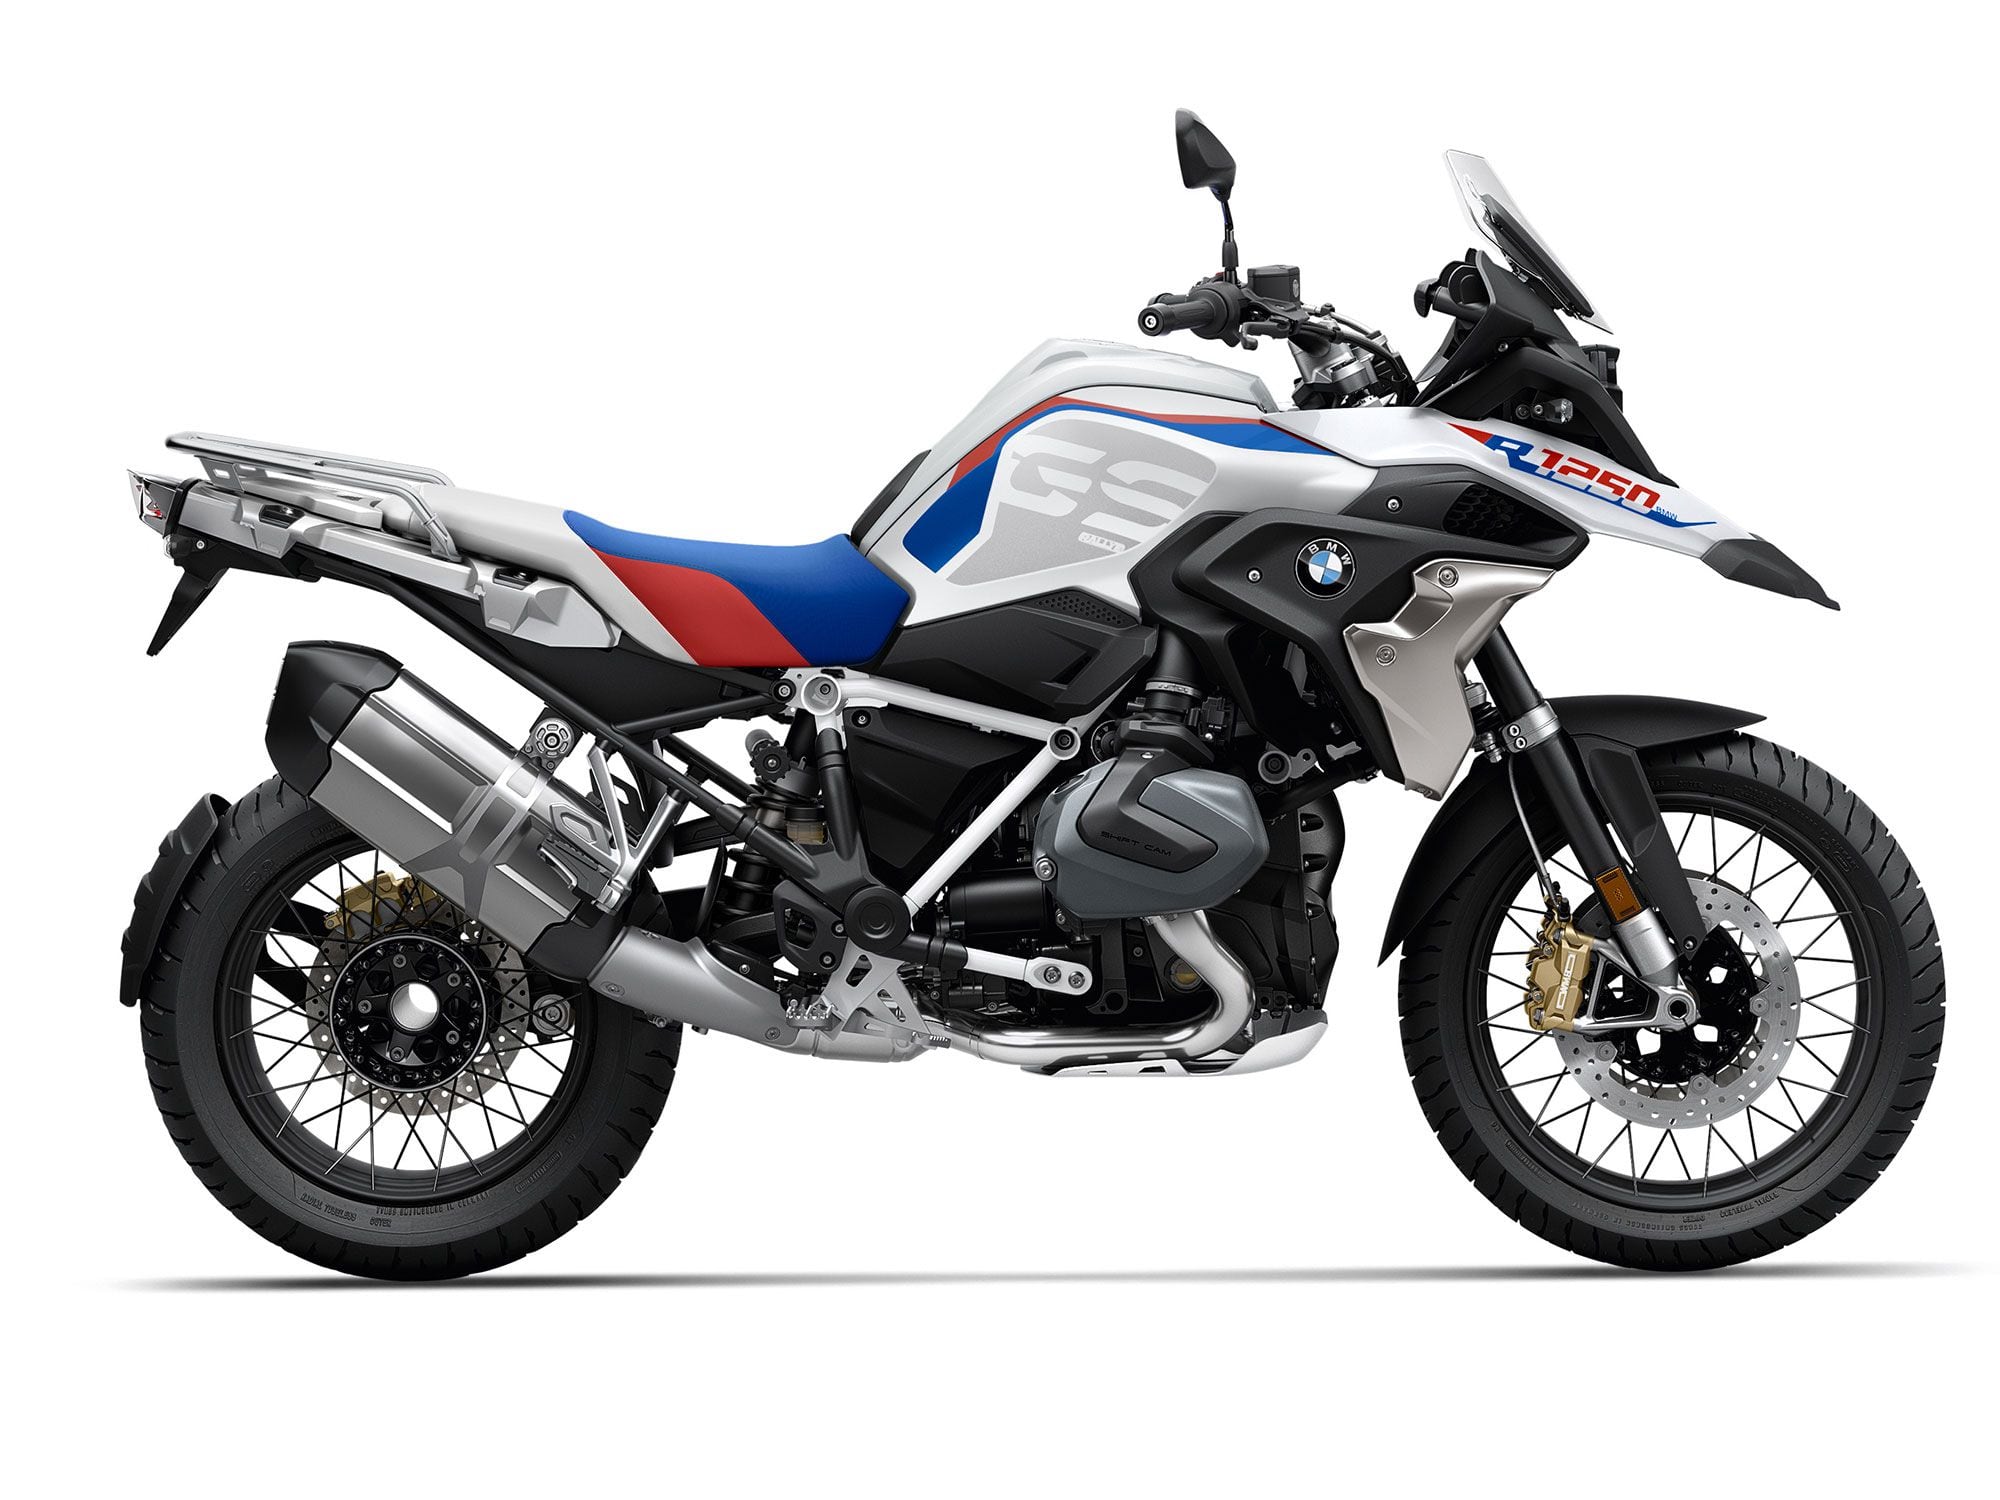 2021 BMW R 1250 GS And R 1250 GS Adventure First Look ...